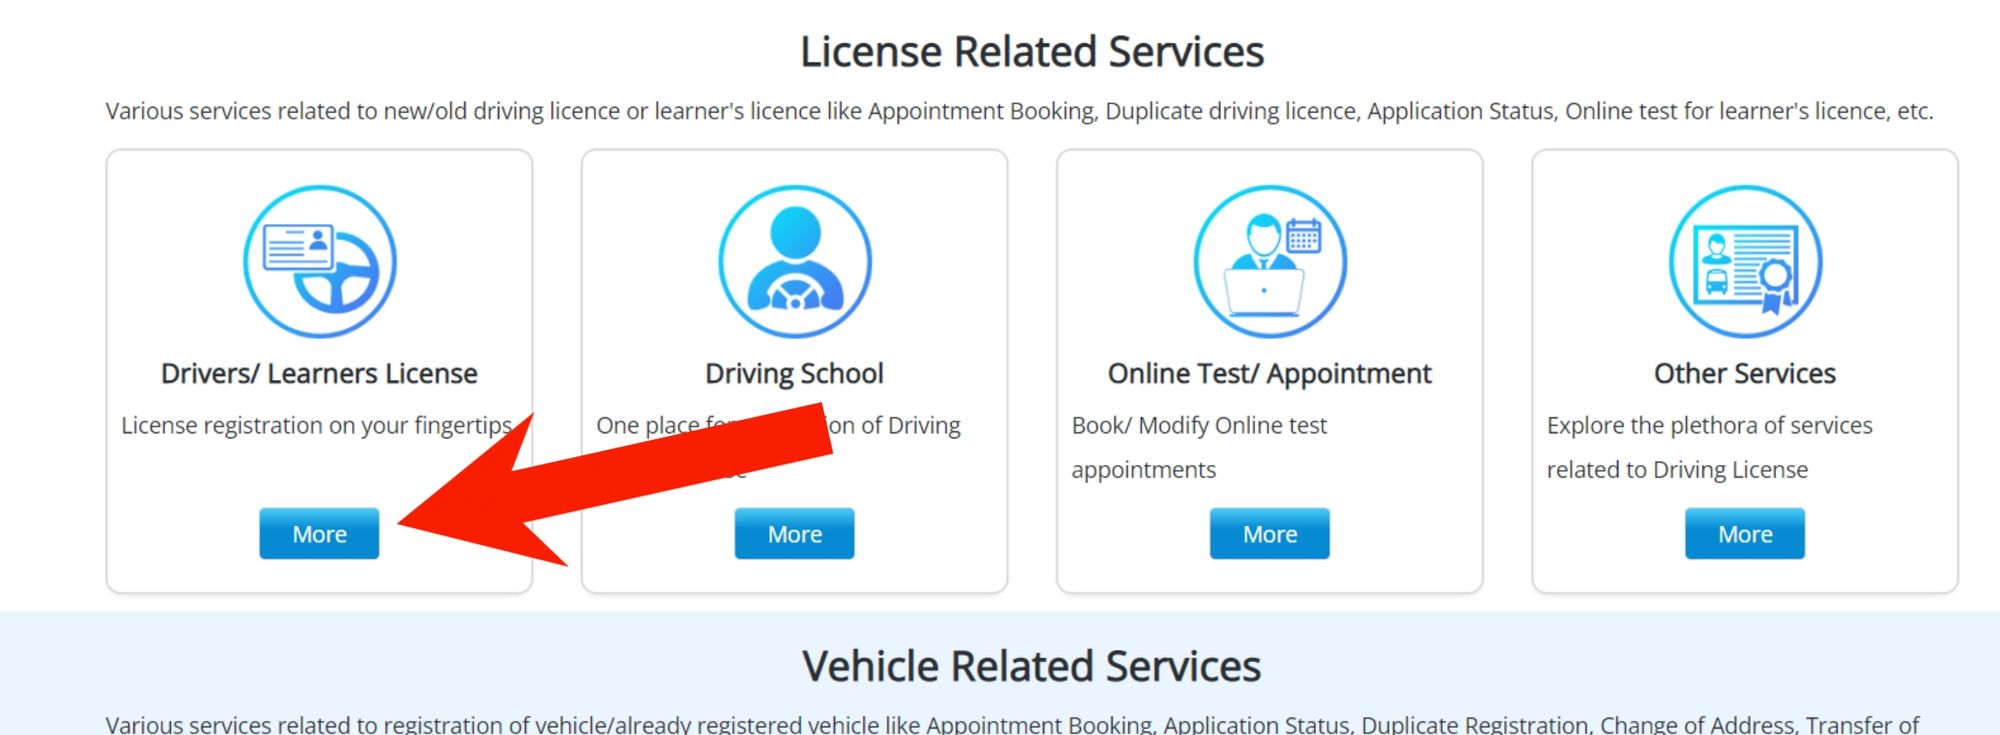 Licence Related Services